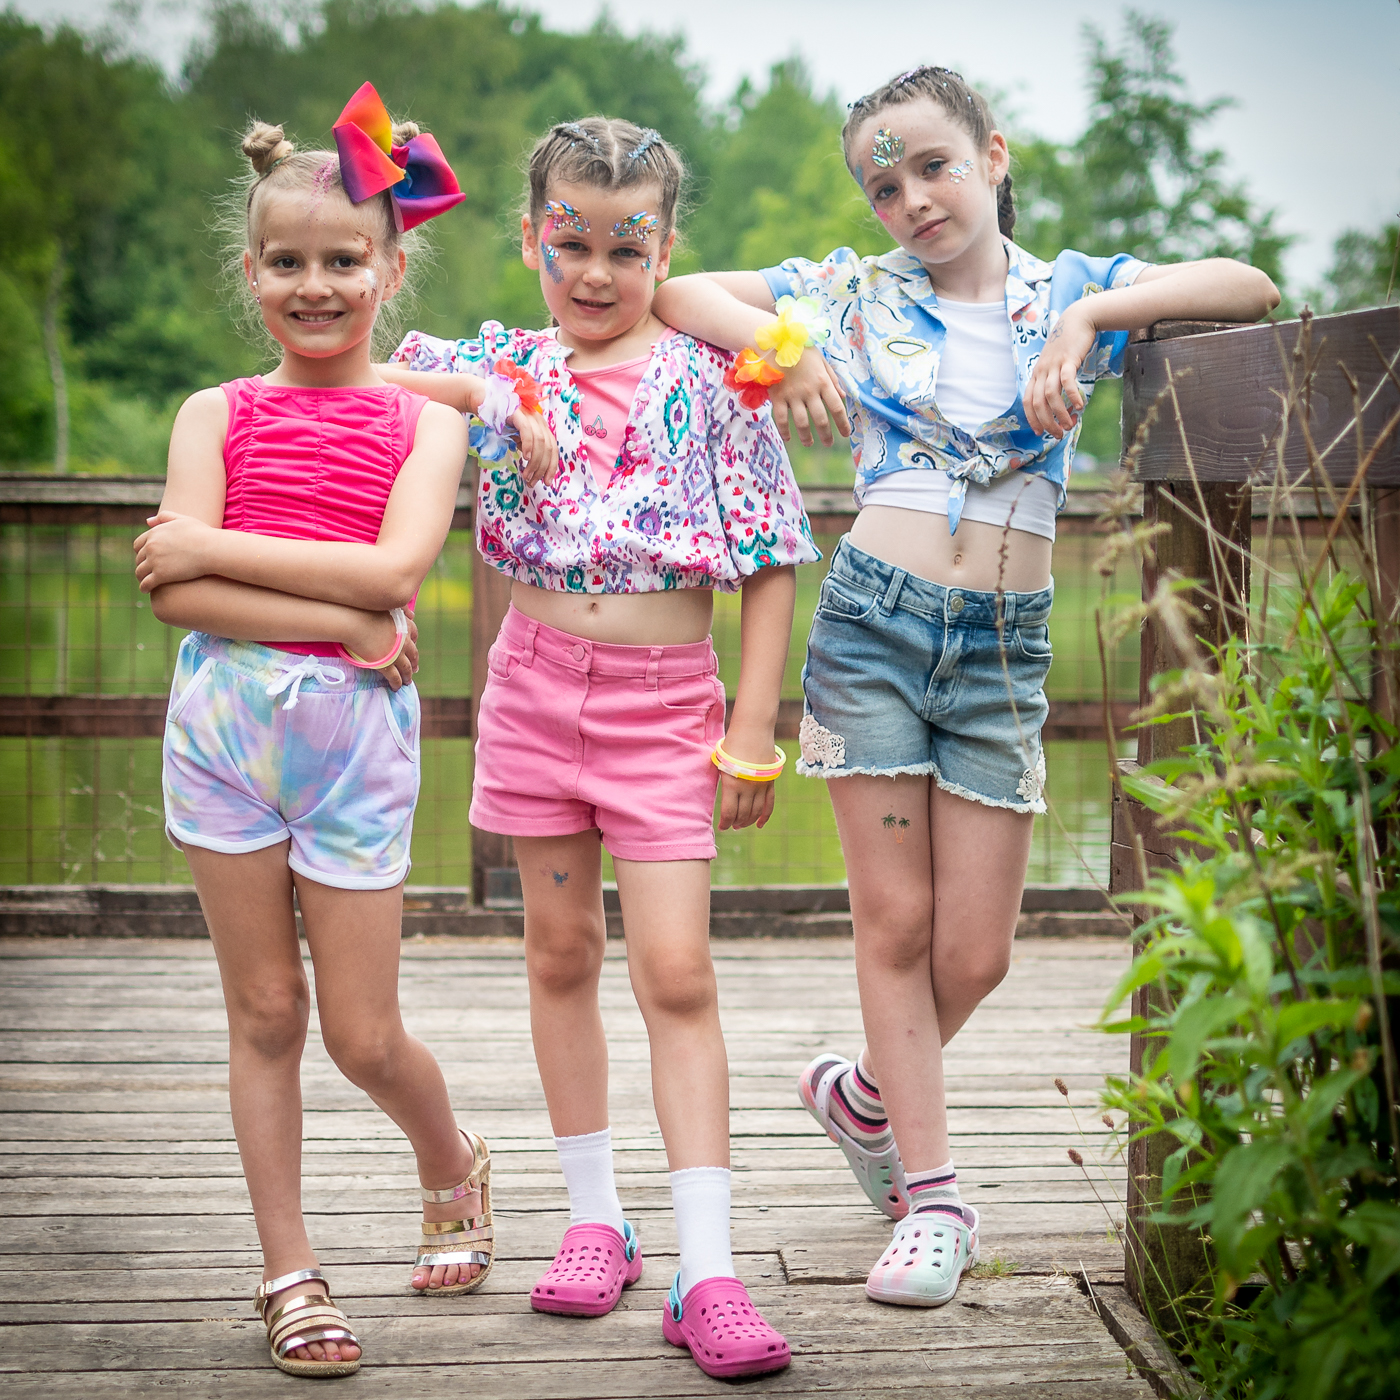 Childrens party photography South Wales